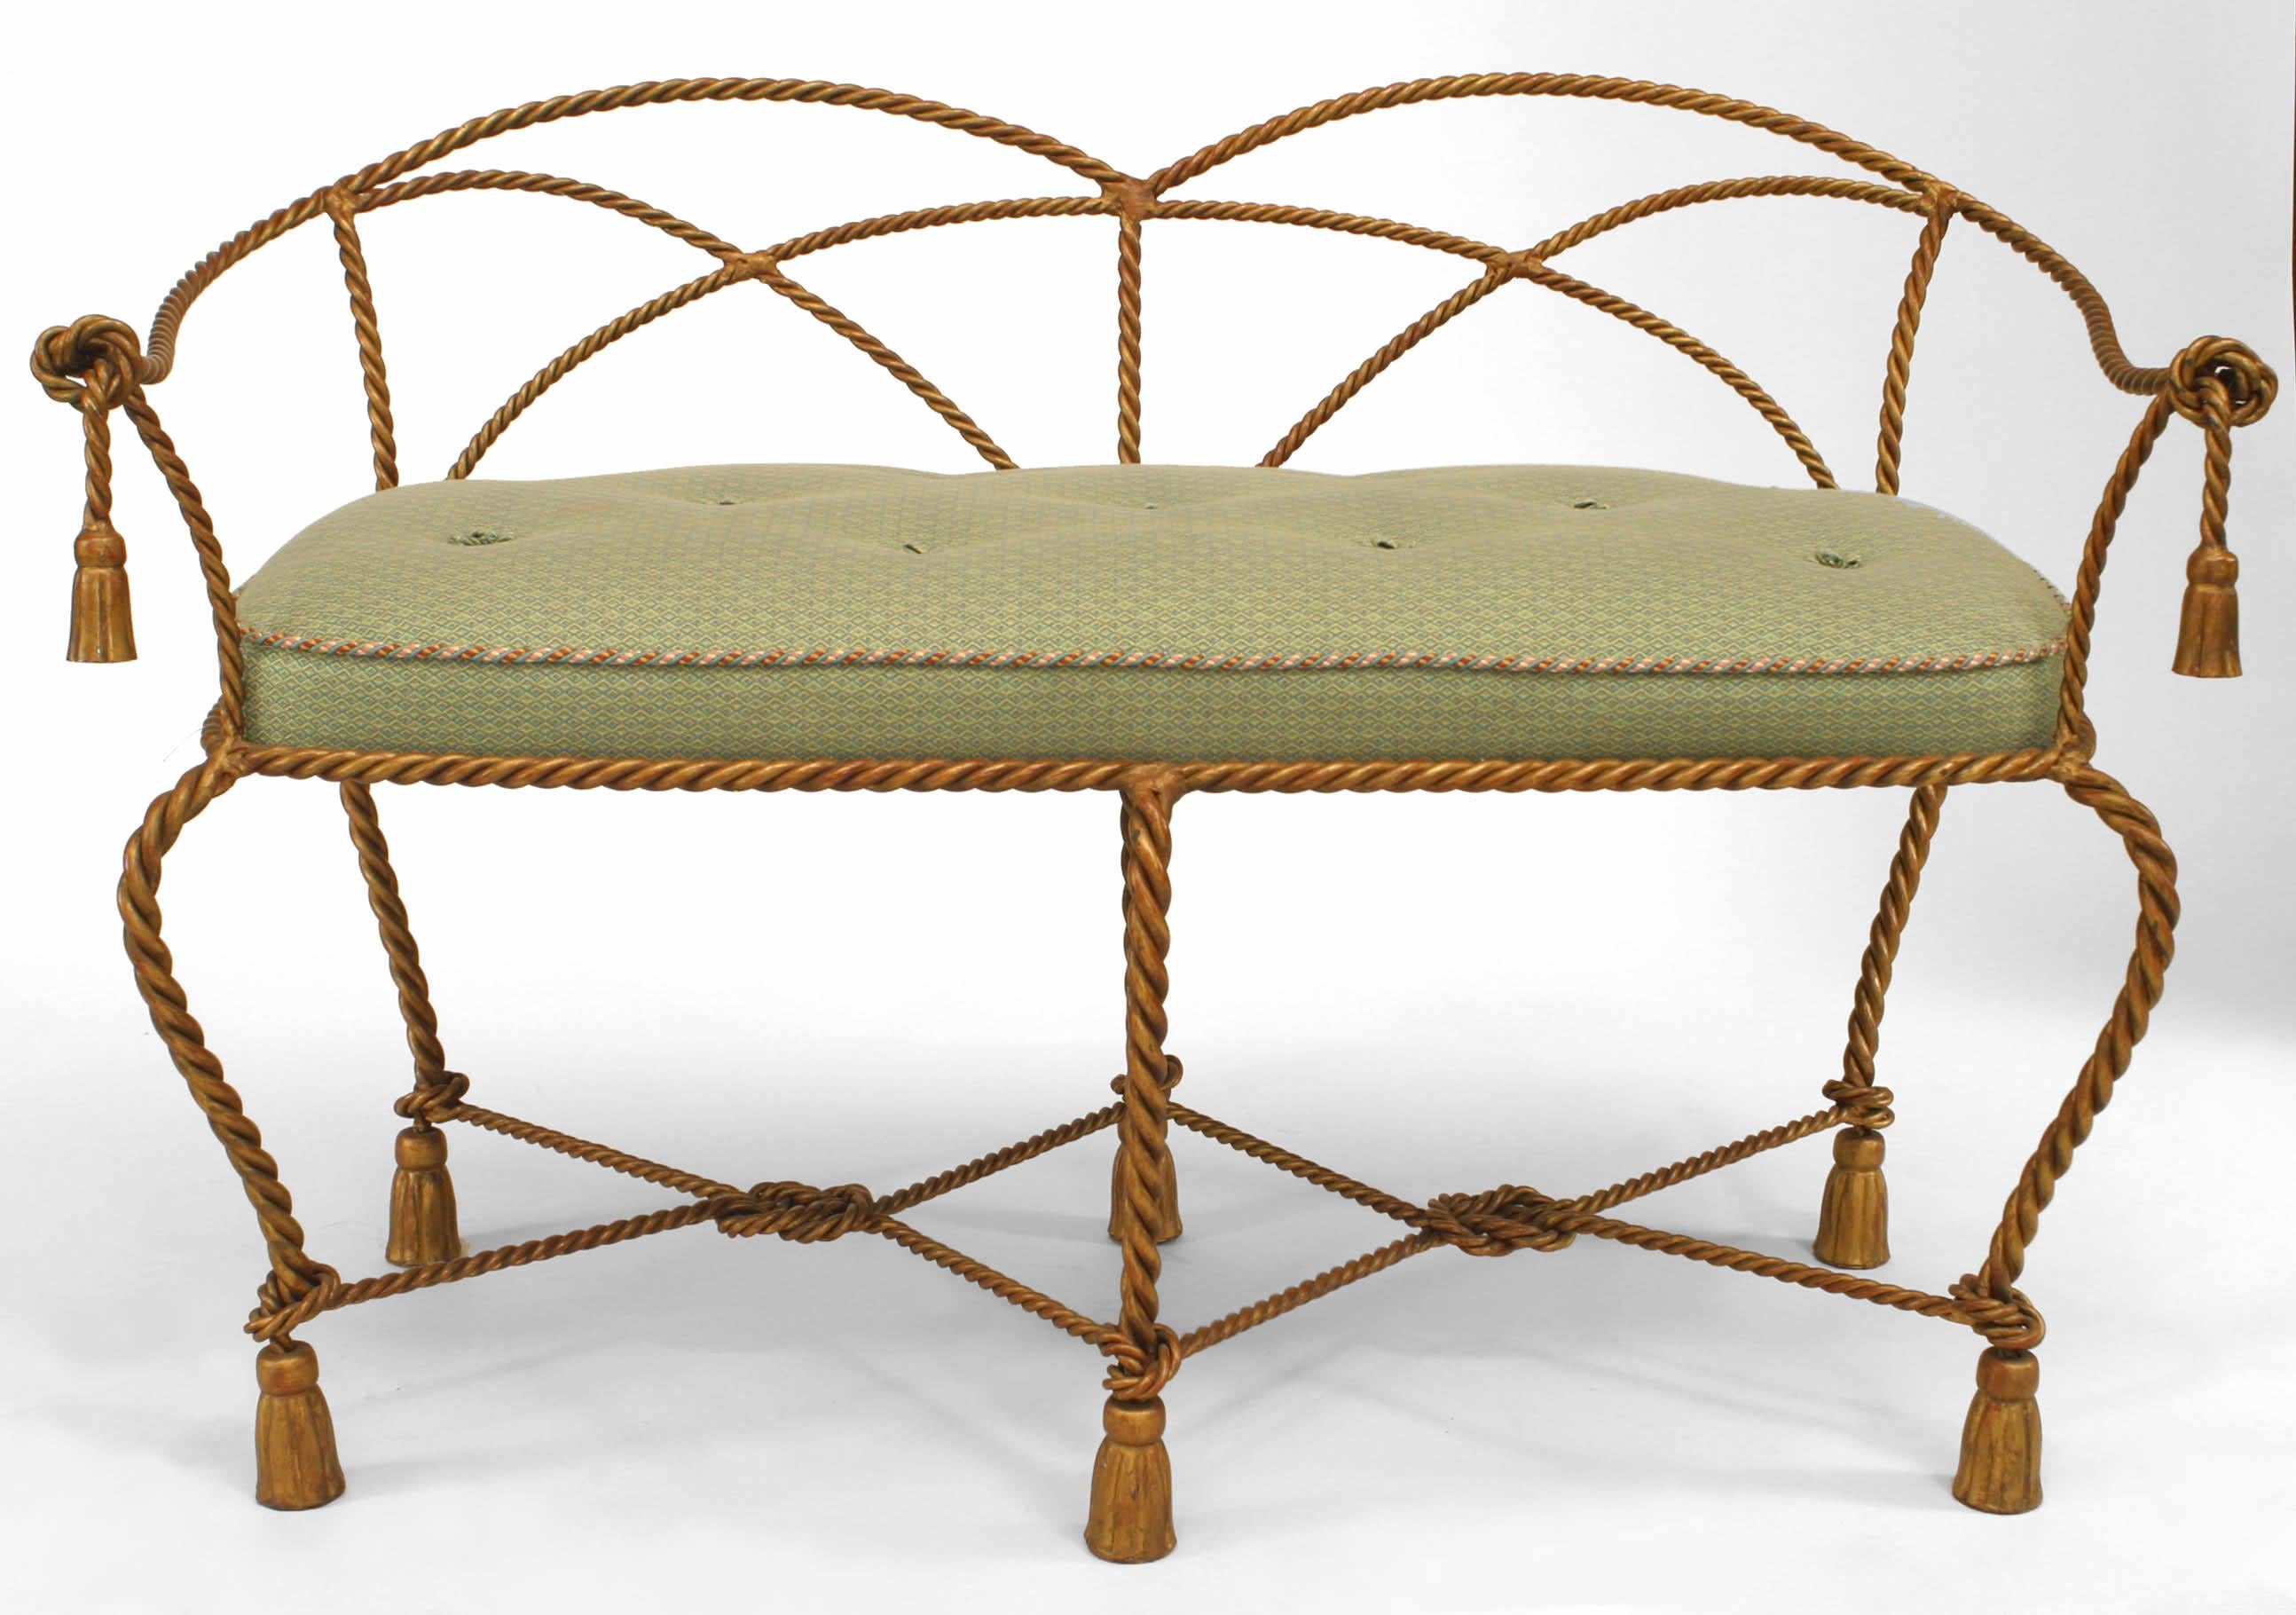 Gilt metal rope and tassel design loveseat with open design back and upholstered seat (20th cent.)
